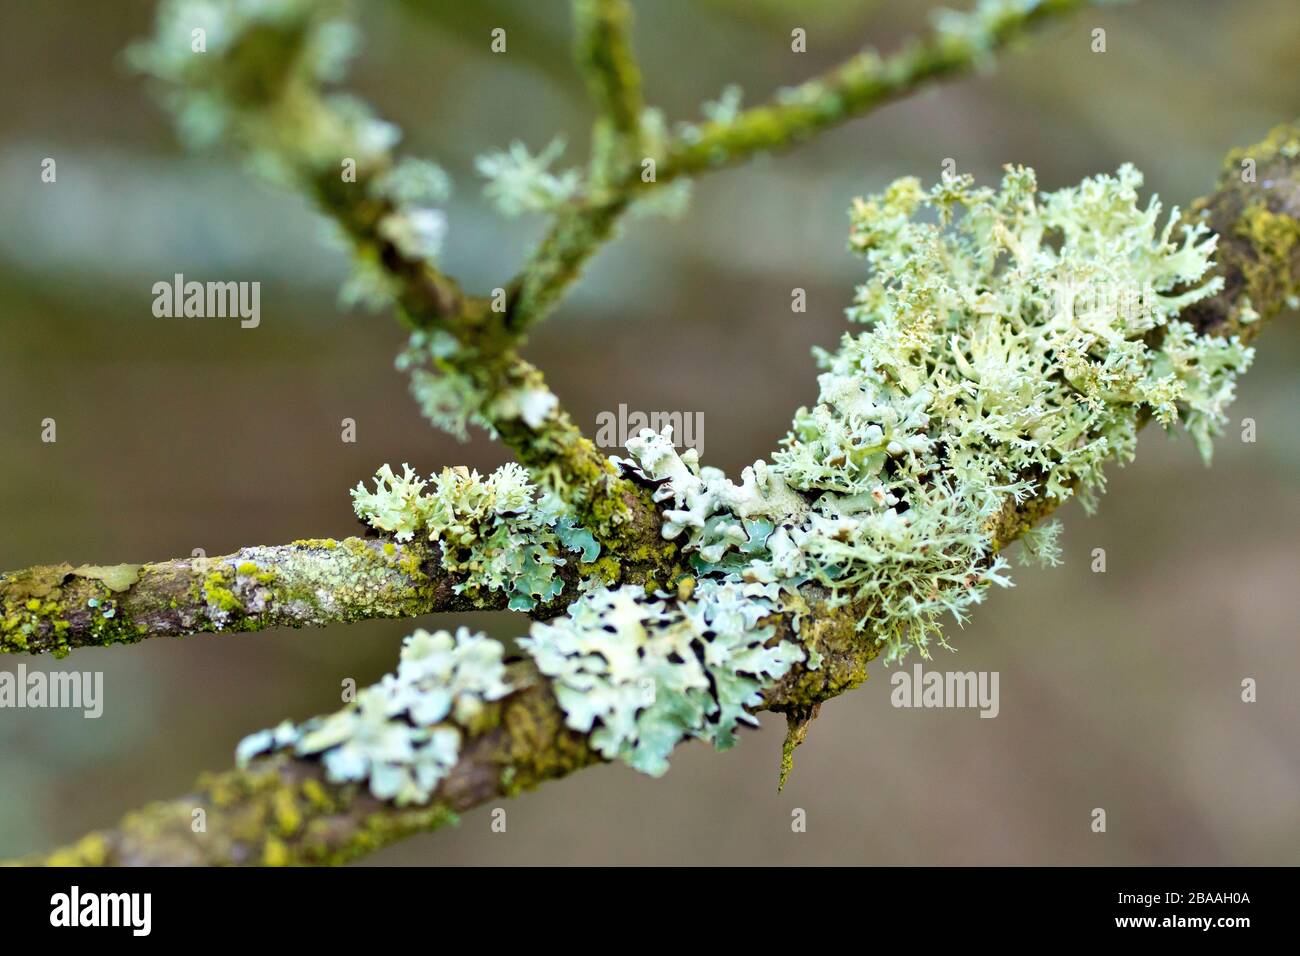 Close up showing detail of lichens on the branches of a tree, probably Oakmoss (evernia prunastri) and Hammered Shield lichen (parmelia sulcata). Stock Photo